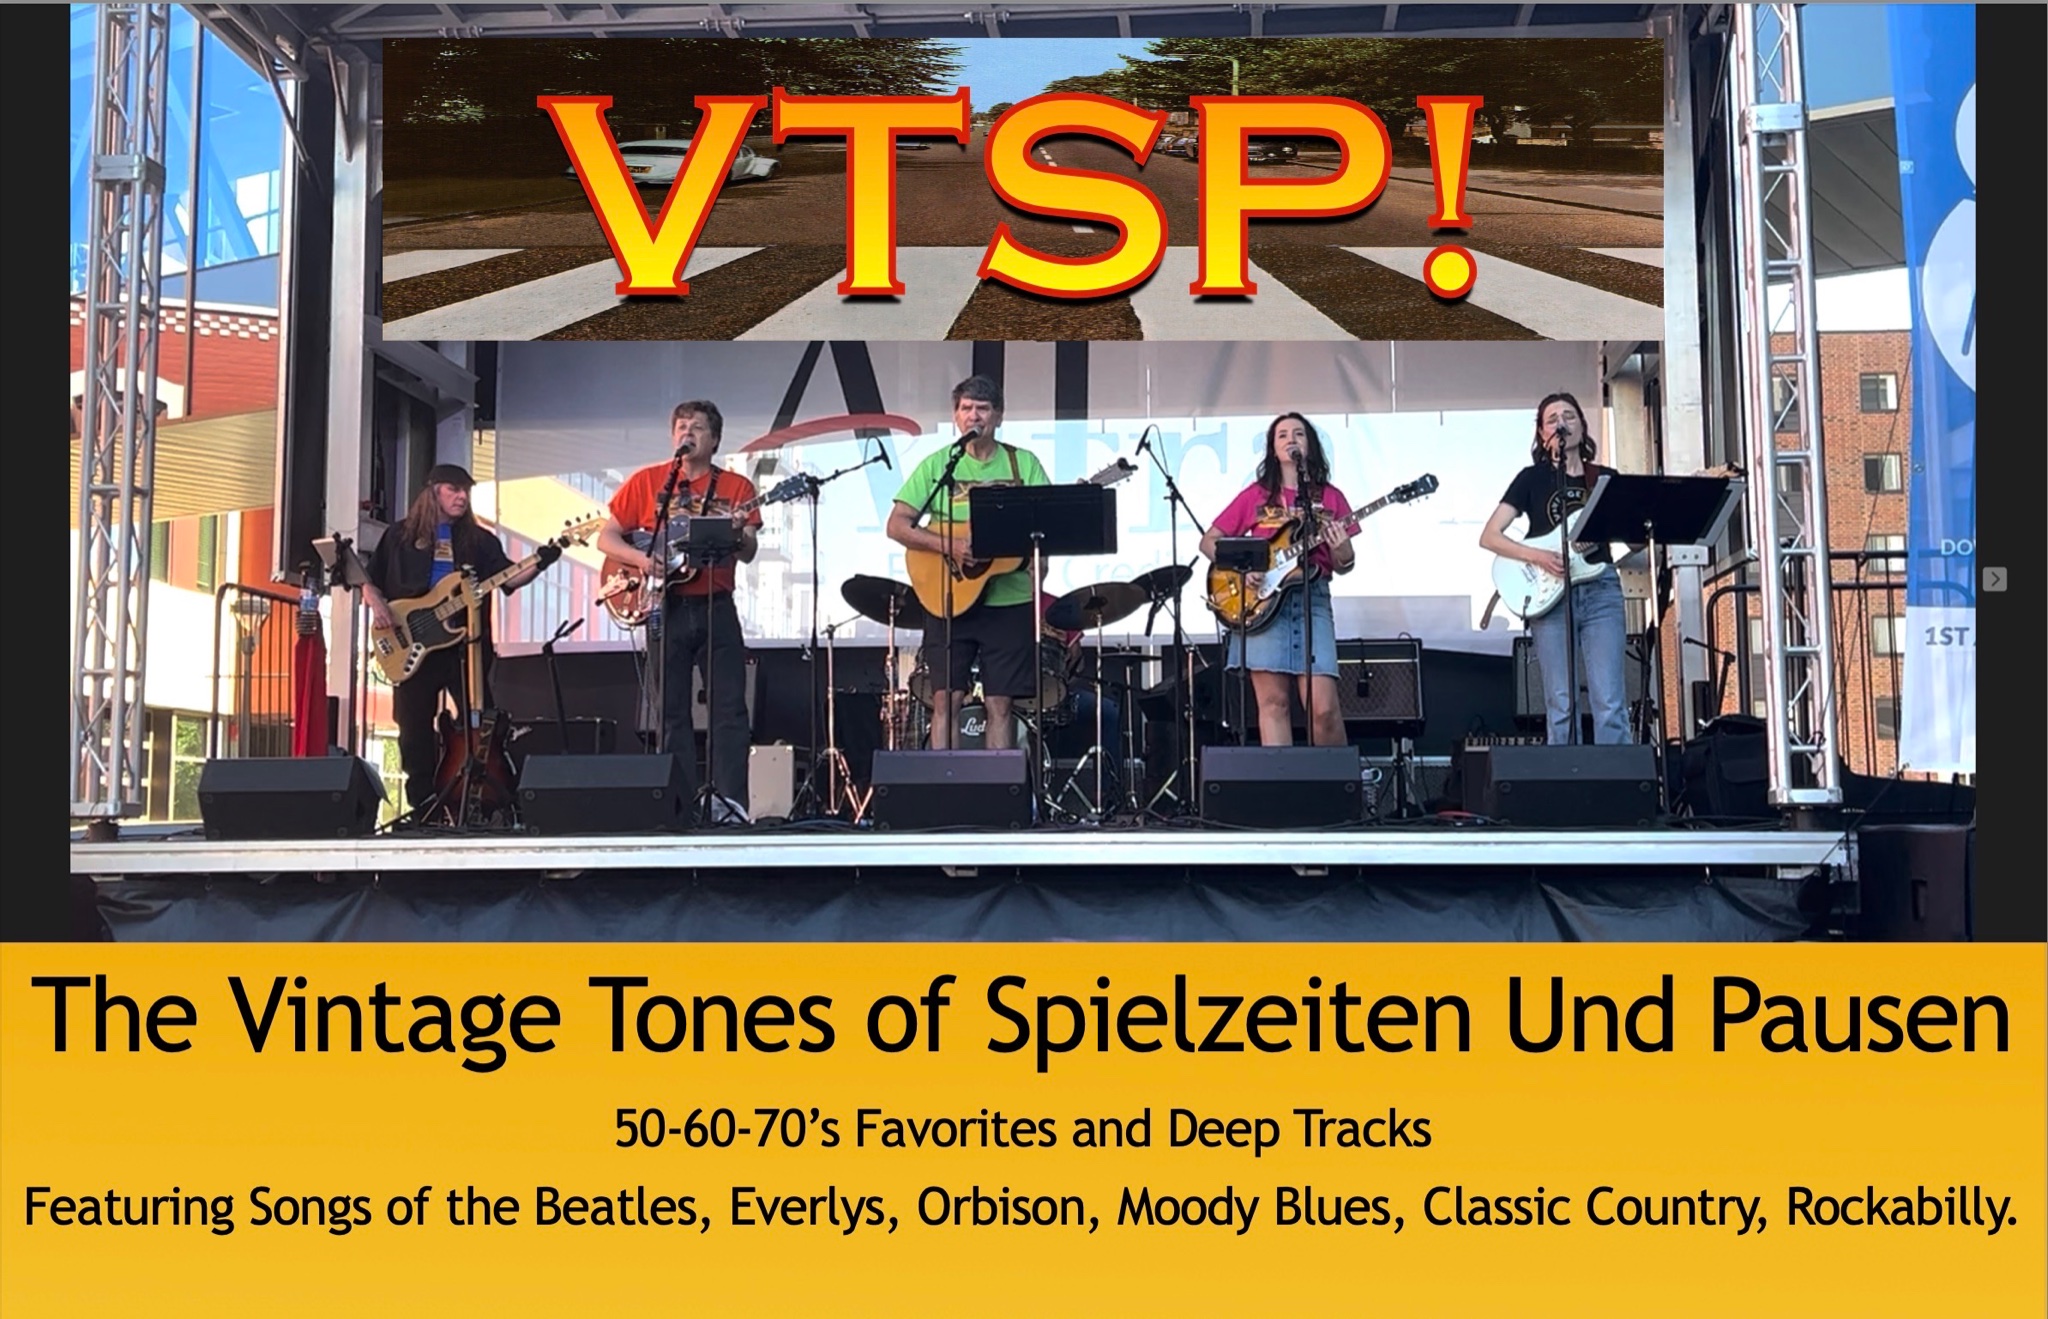 The Vintage Tones of Spielzeiten Und Pausen perform 50s-60s-70s favorites and deep tracks featuring songs of The Beatles, Everlys, Orbison, ELO, Moody Blues, Emmy Lou Harris, Classic Country, and Rockabilly.